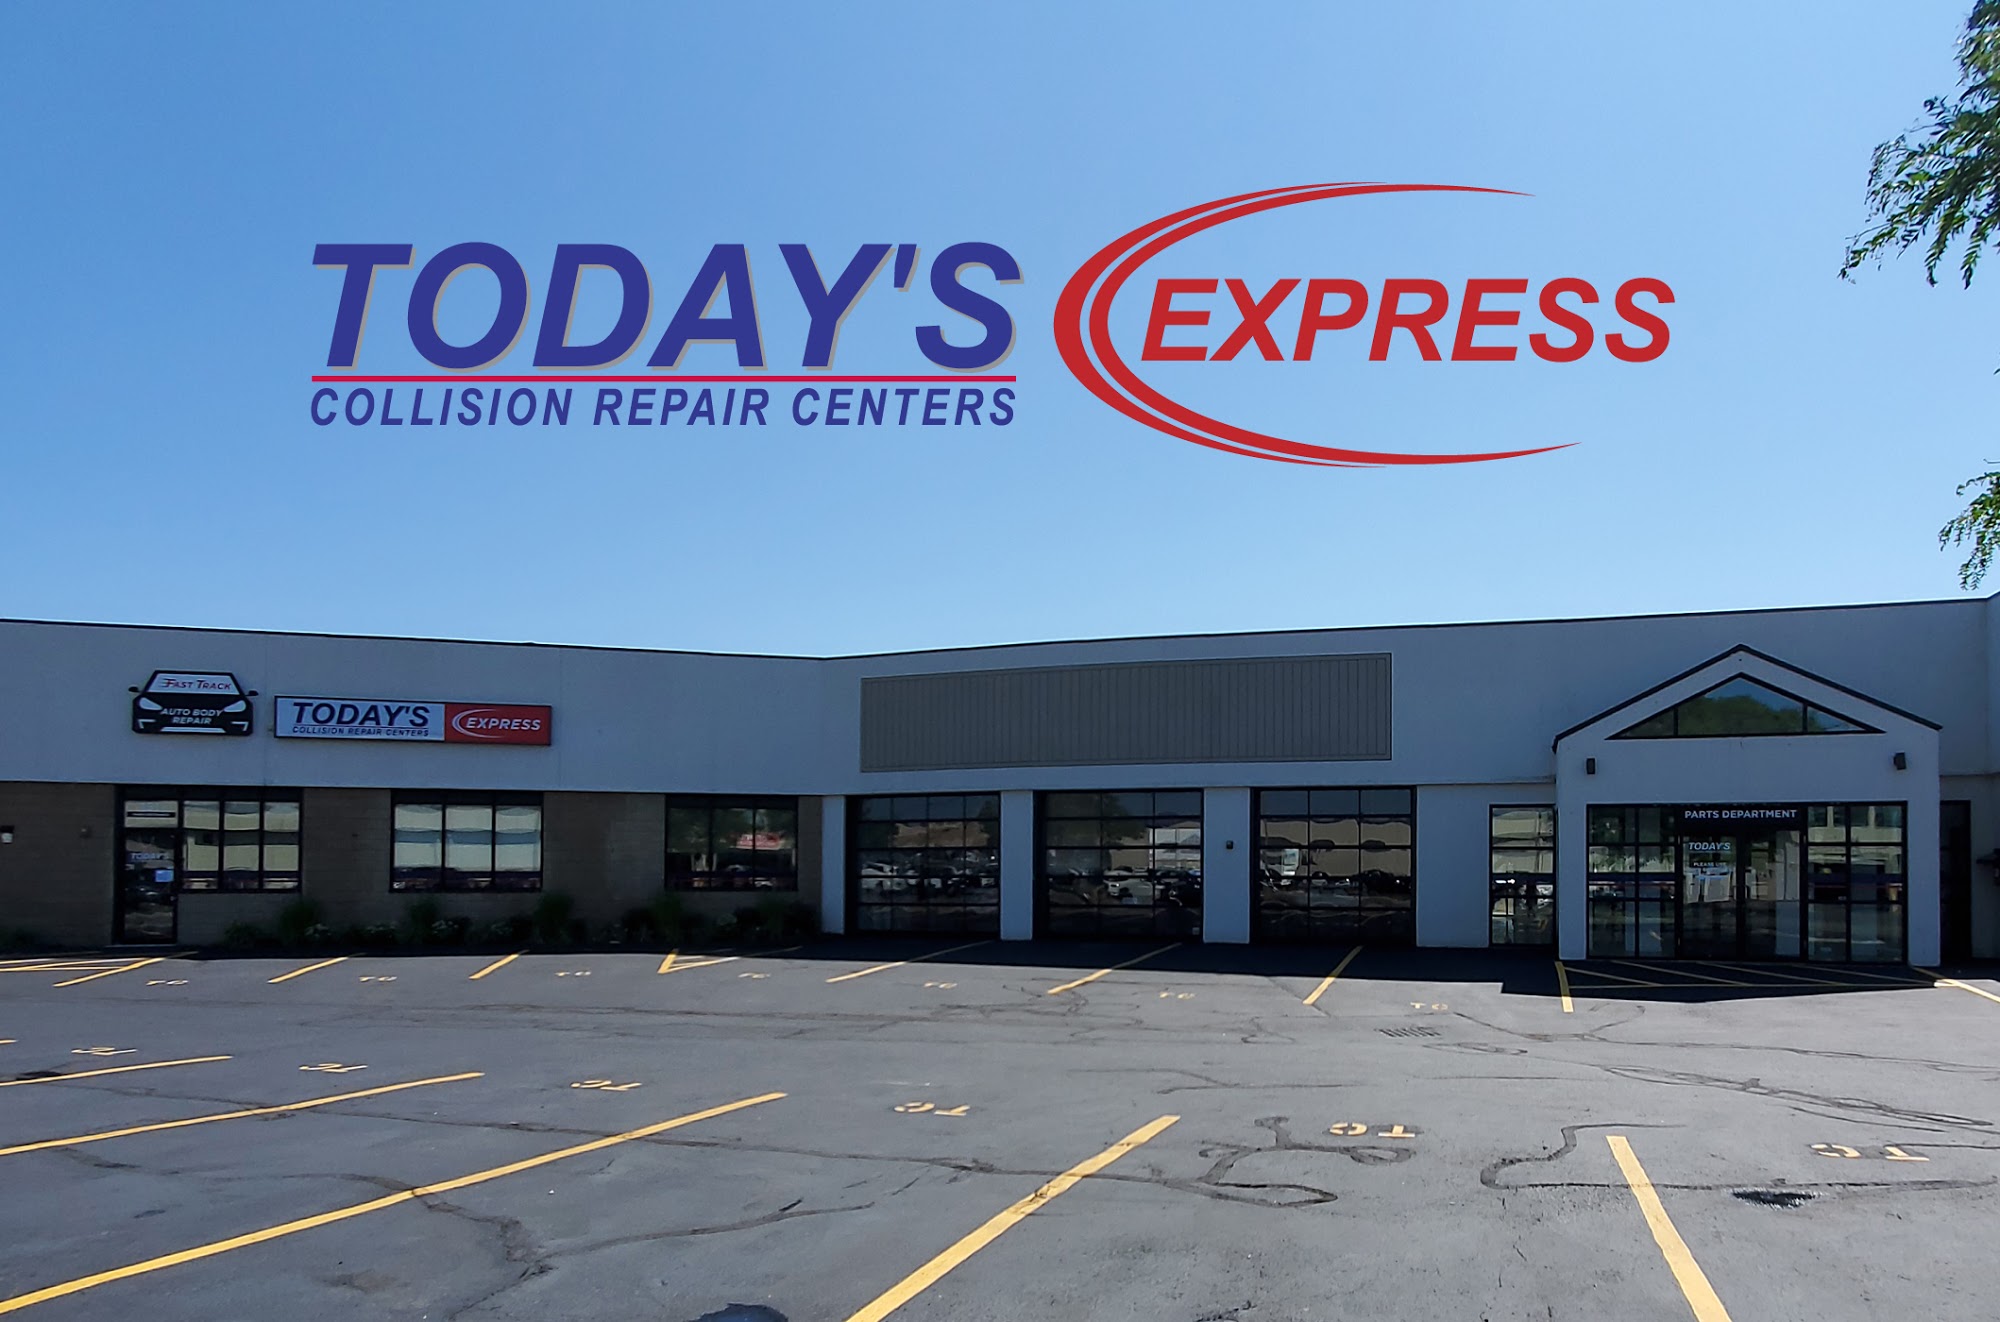 Today's Collision Express